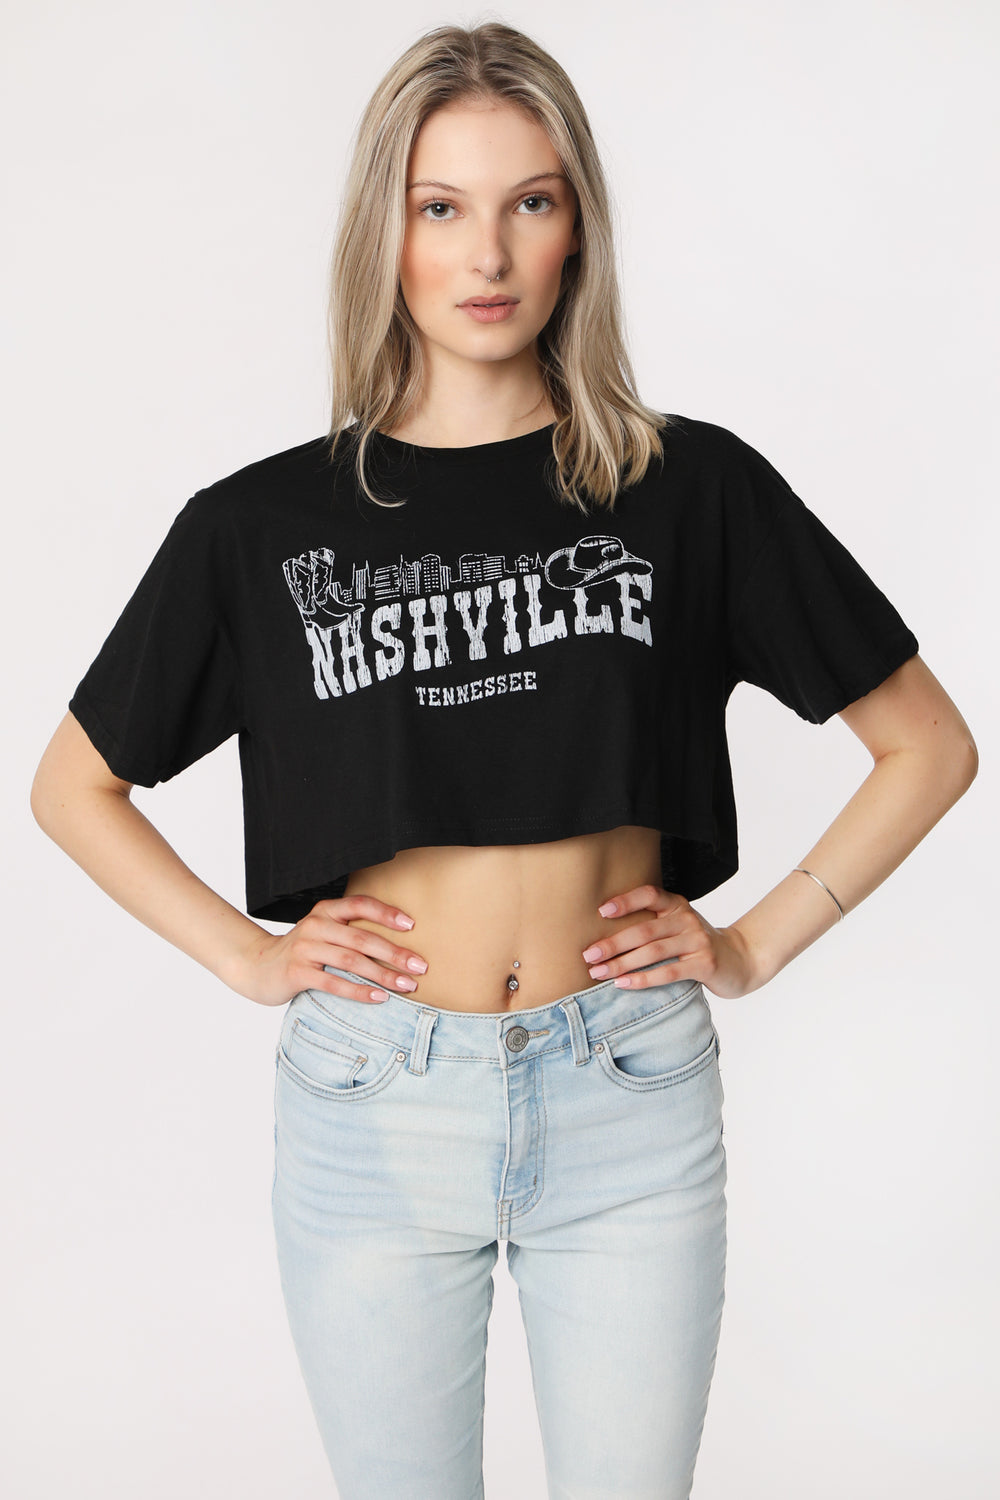 Womens Nashville Cropped Tee Womens Nashville Cropped Tee